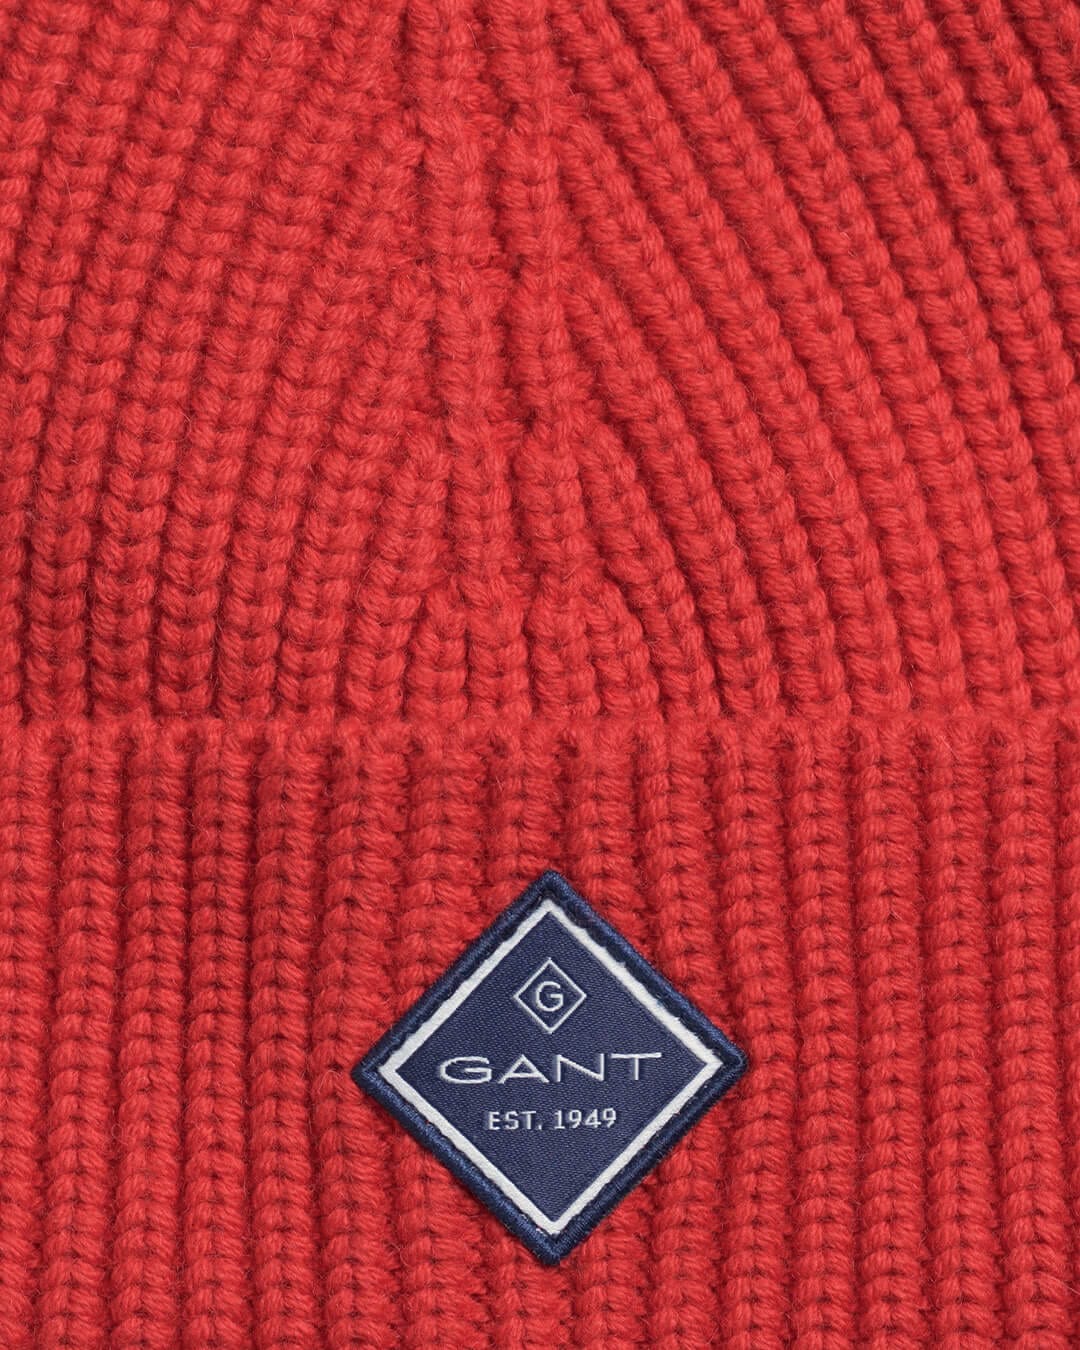 Gant Hats ONE SIZE Gant Red Cotton Ribbed Knit Hat